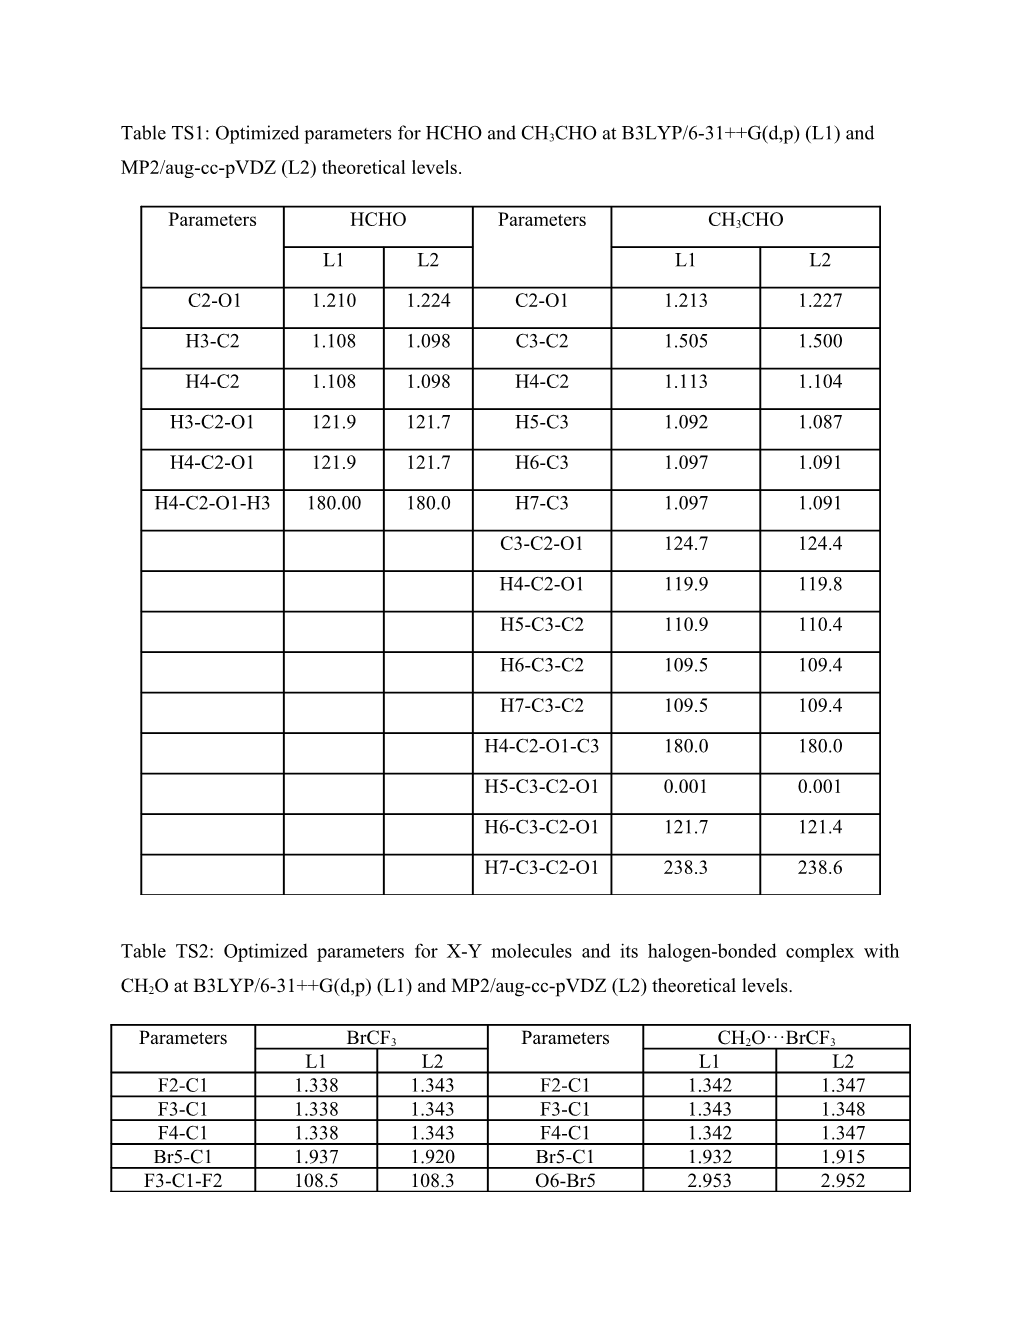 Table TS1: Optimized Parameters for HCHO and CH3CHO at B3LYP/6-31 G(D,P) (L1) And